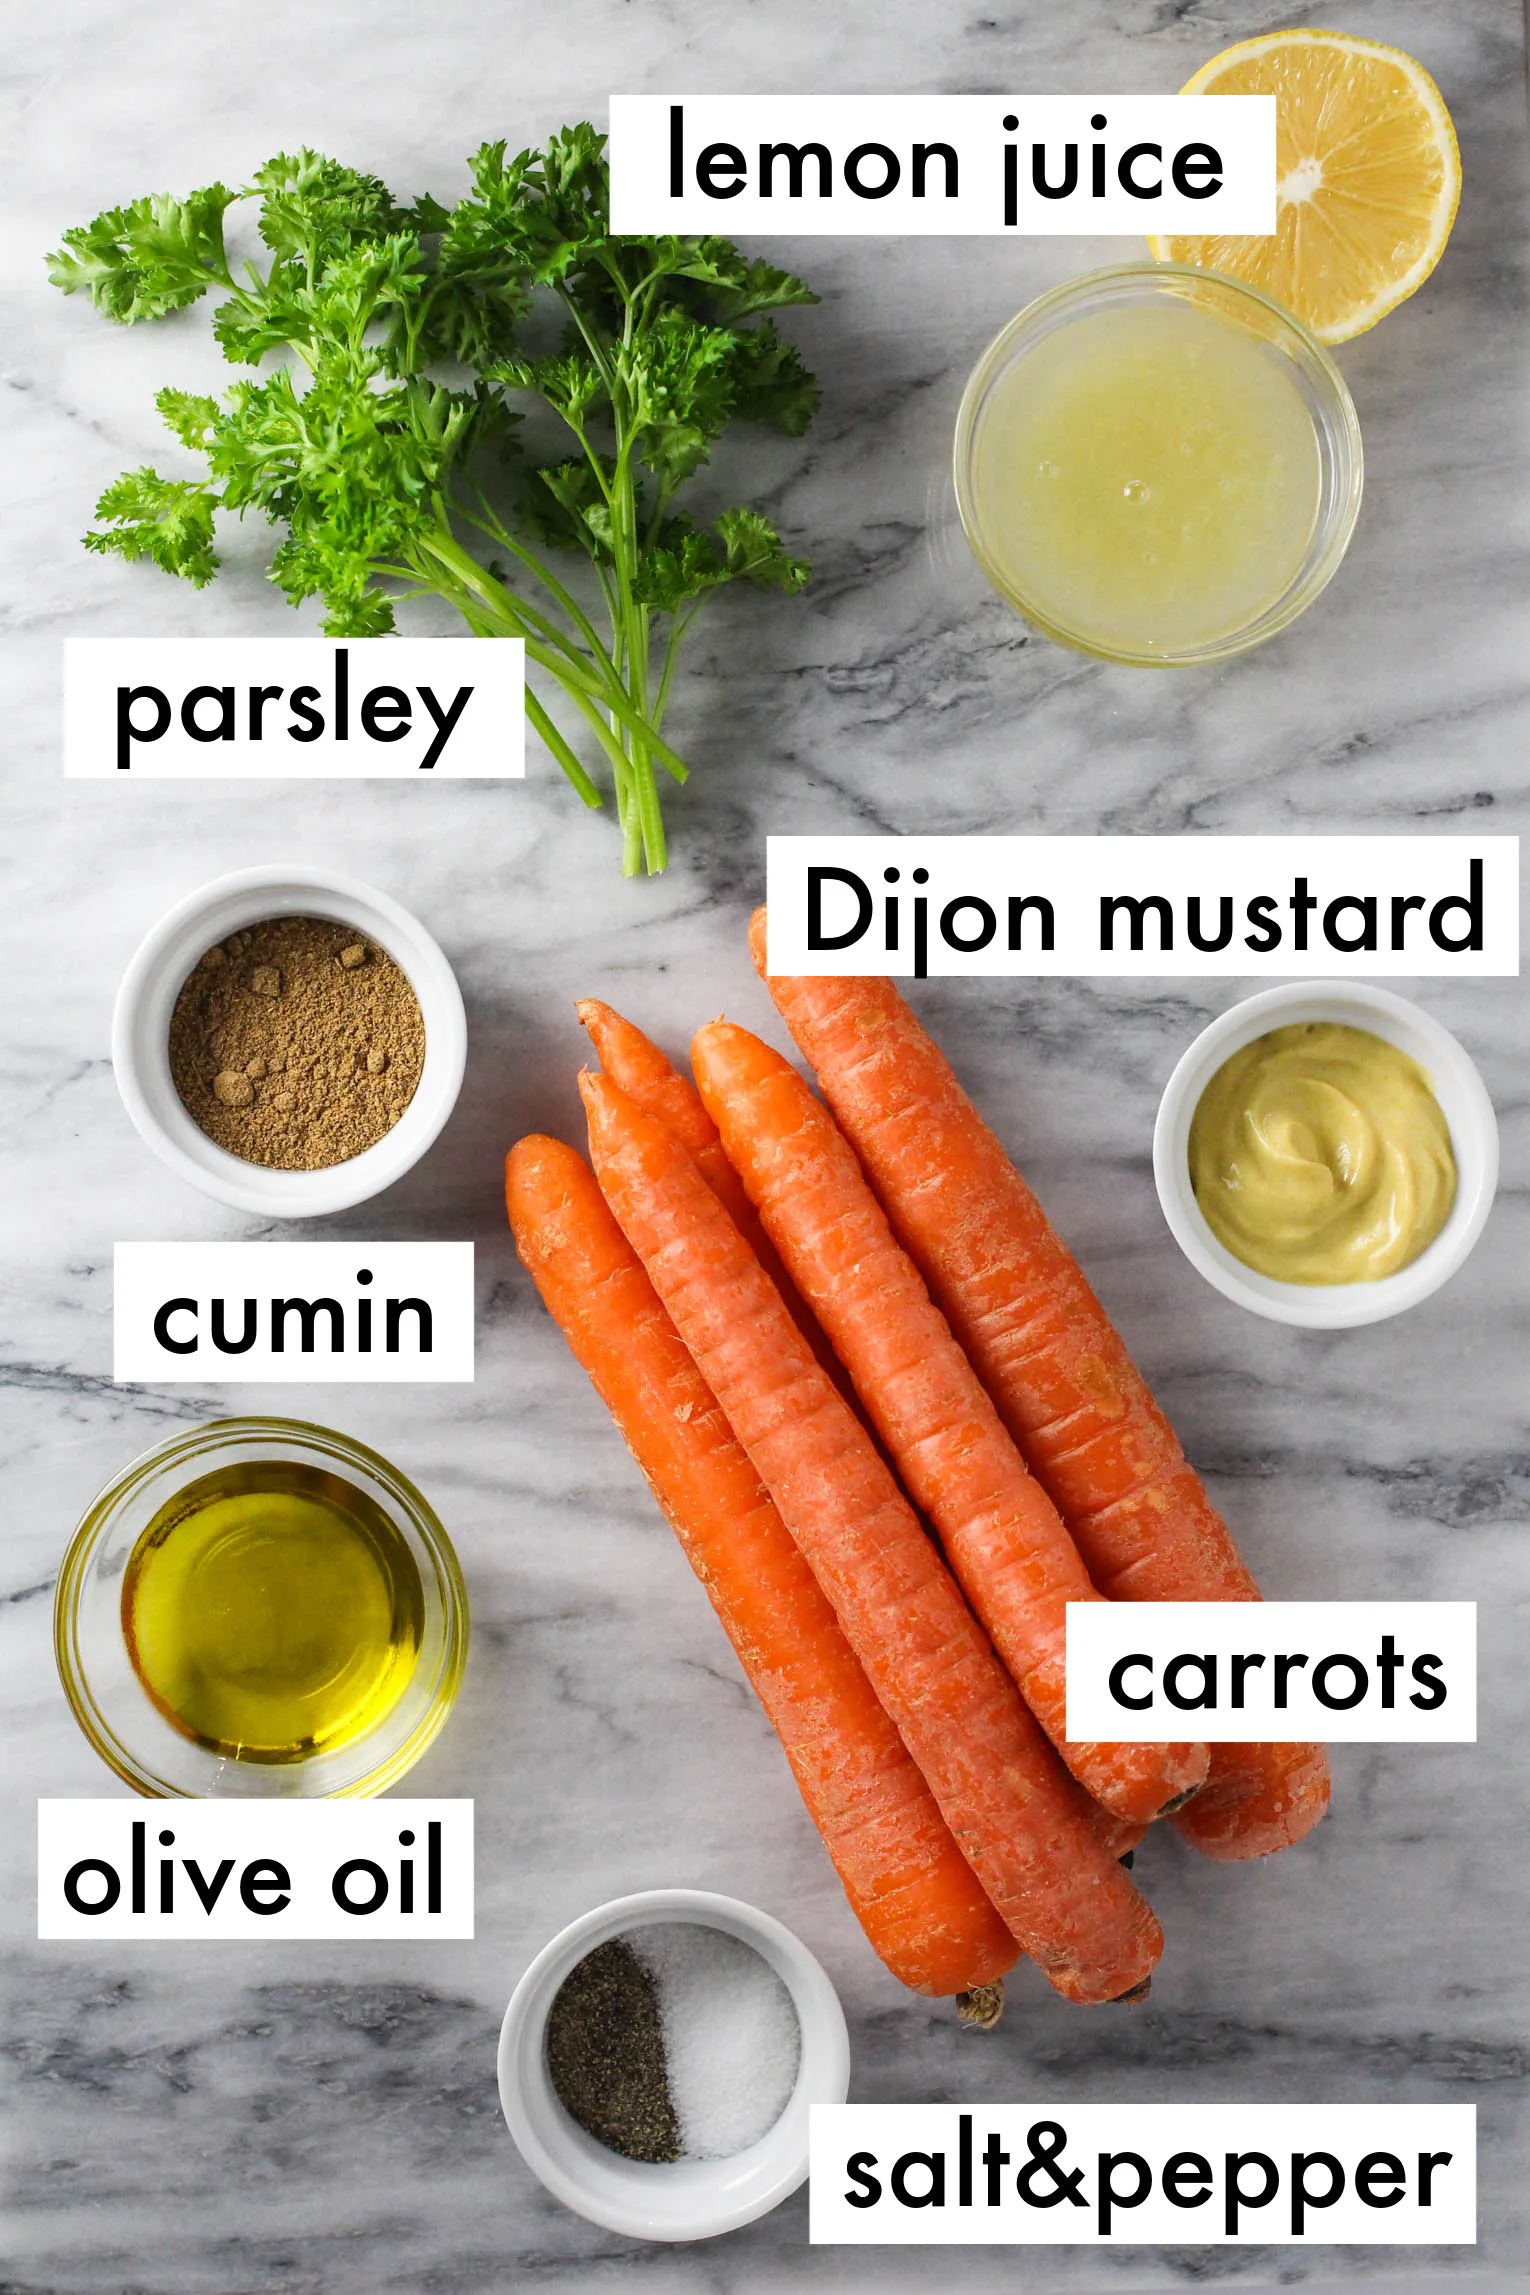 Ingredients for the French carrot salad displayed on a marble background. The ingredients are listed as follows: lemon juice, parsley, Dijon mustard, cumin, carrots, olive oil, salt and pepper.